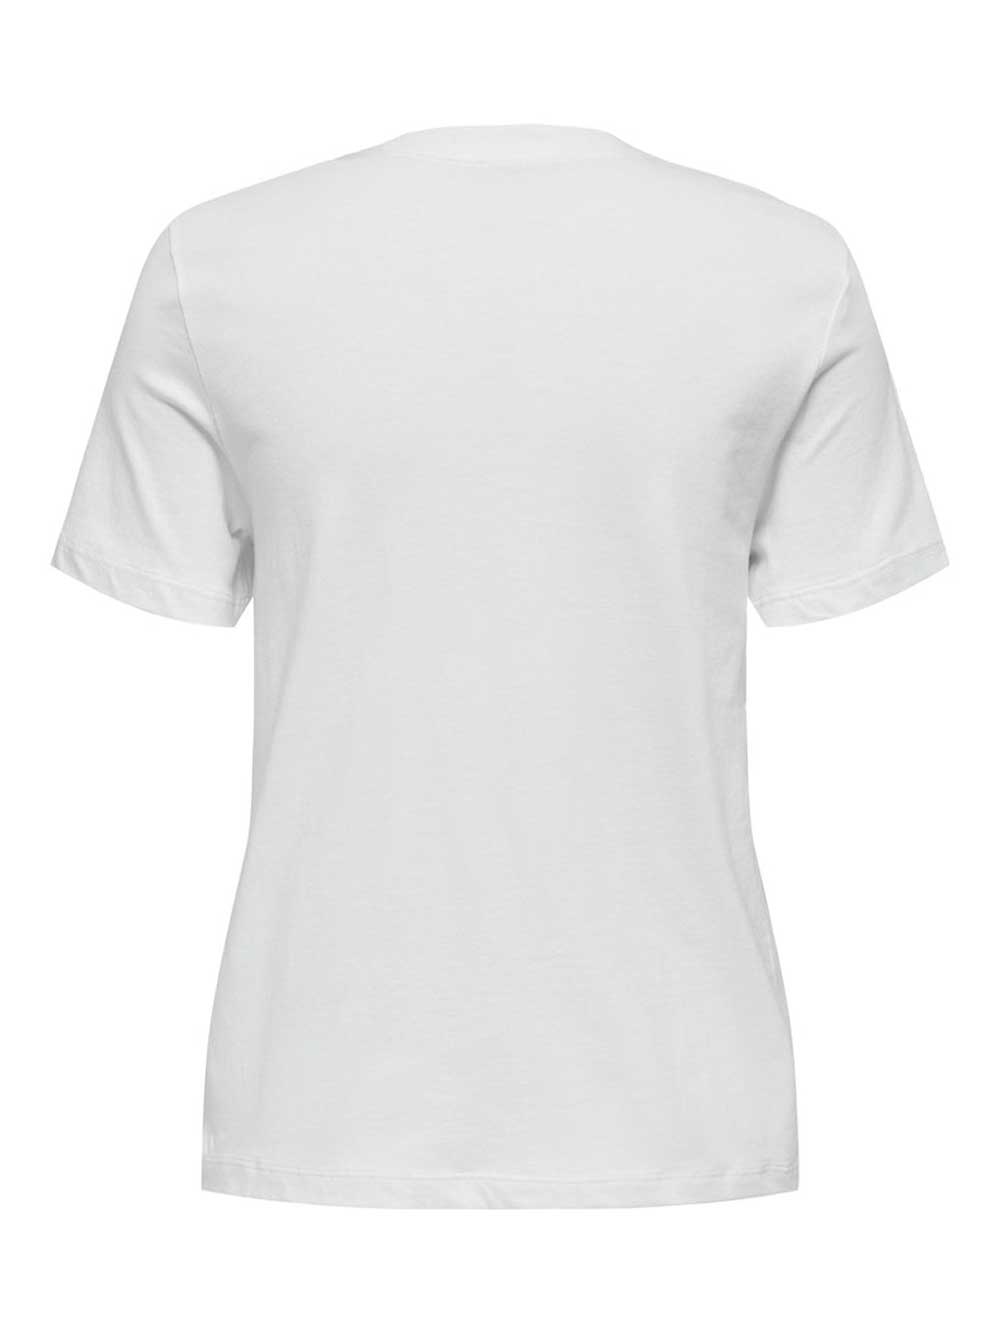 ONLY T-shirts e Tops ONLY da DONNA - bianco